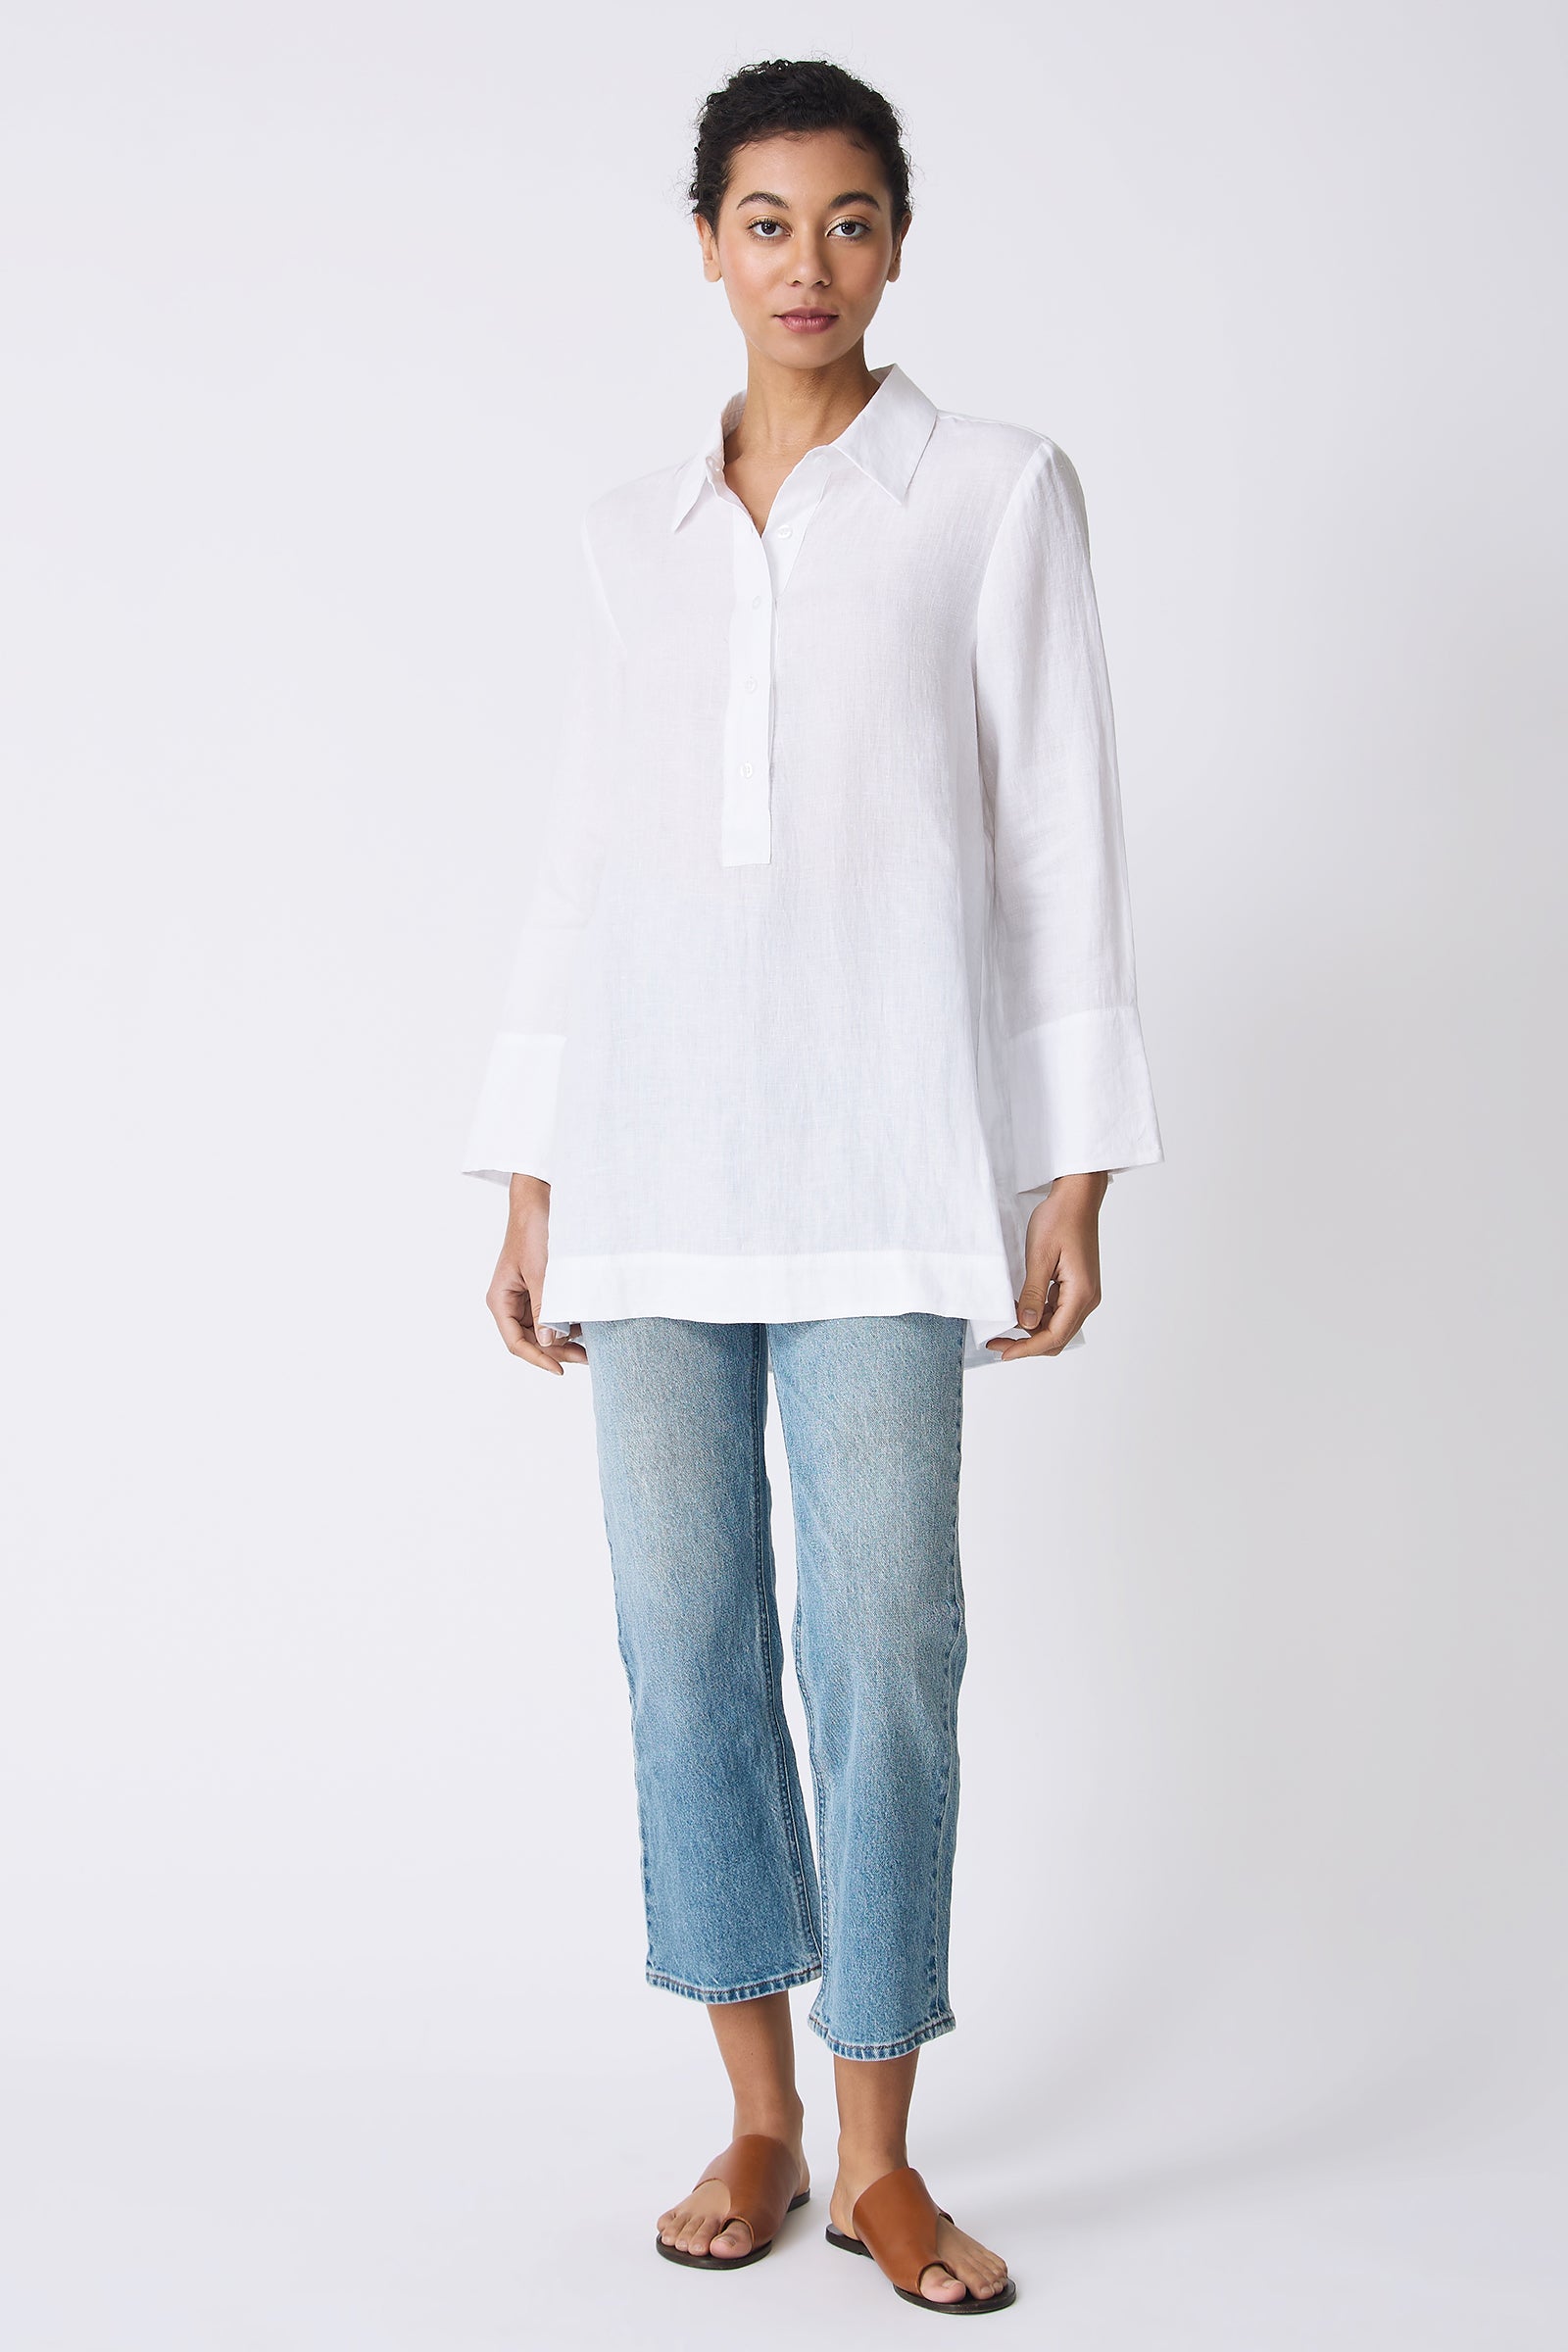 Kal Rieman Inez Placket Tunic in White on model full front view